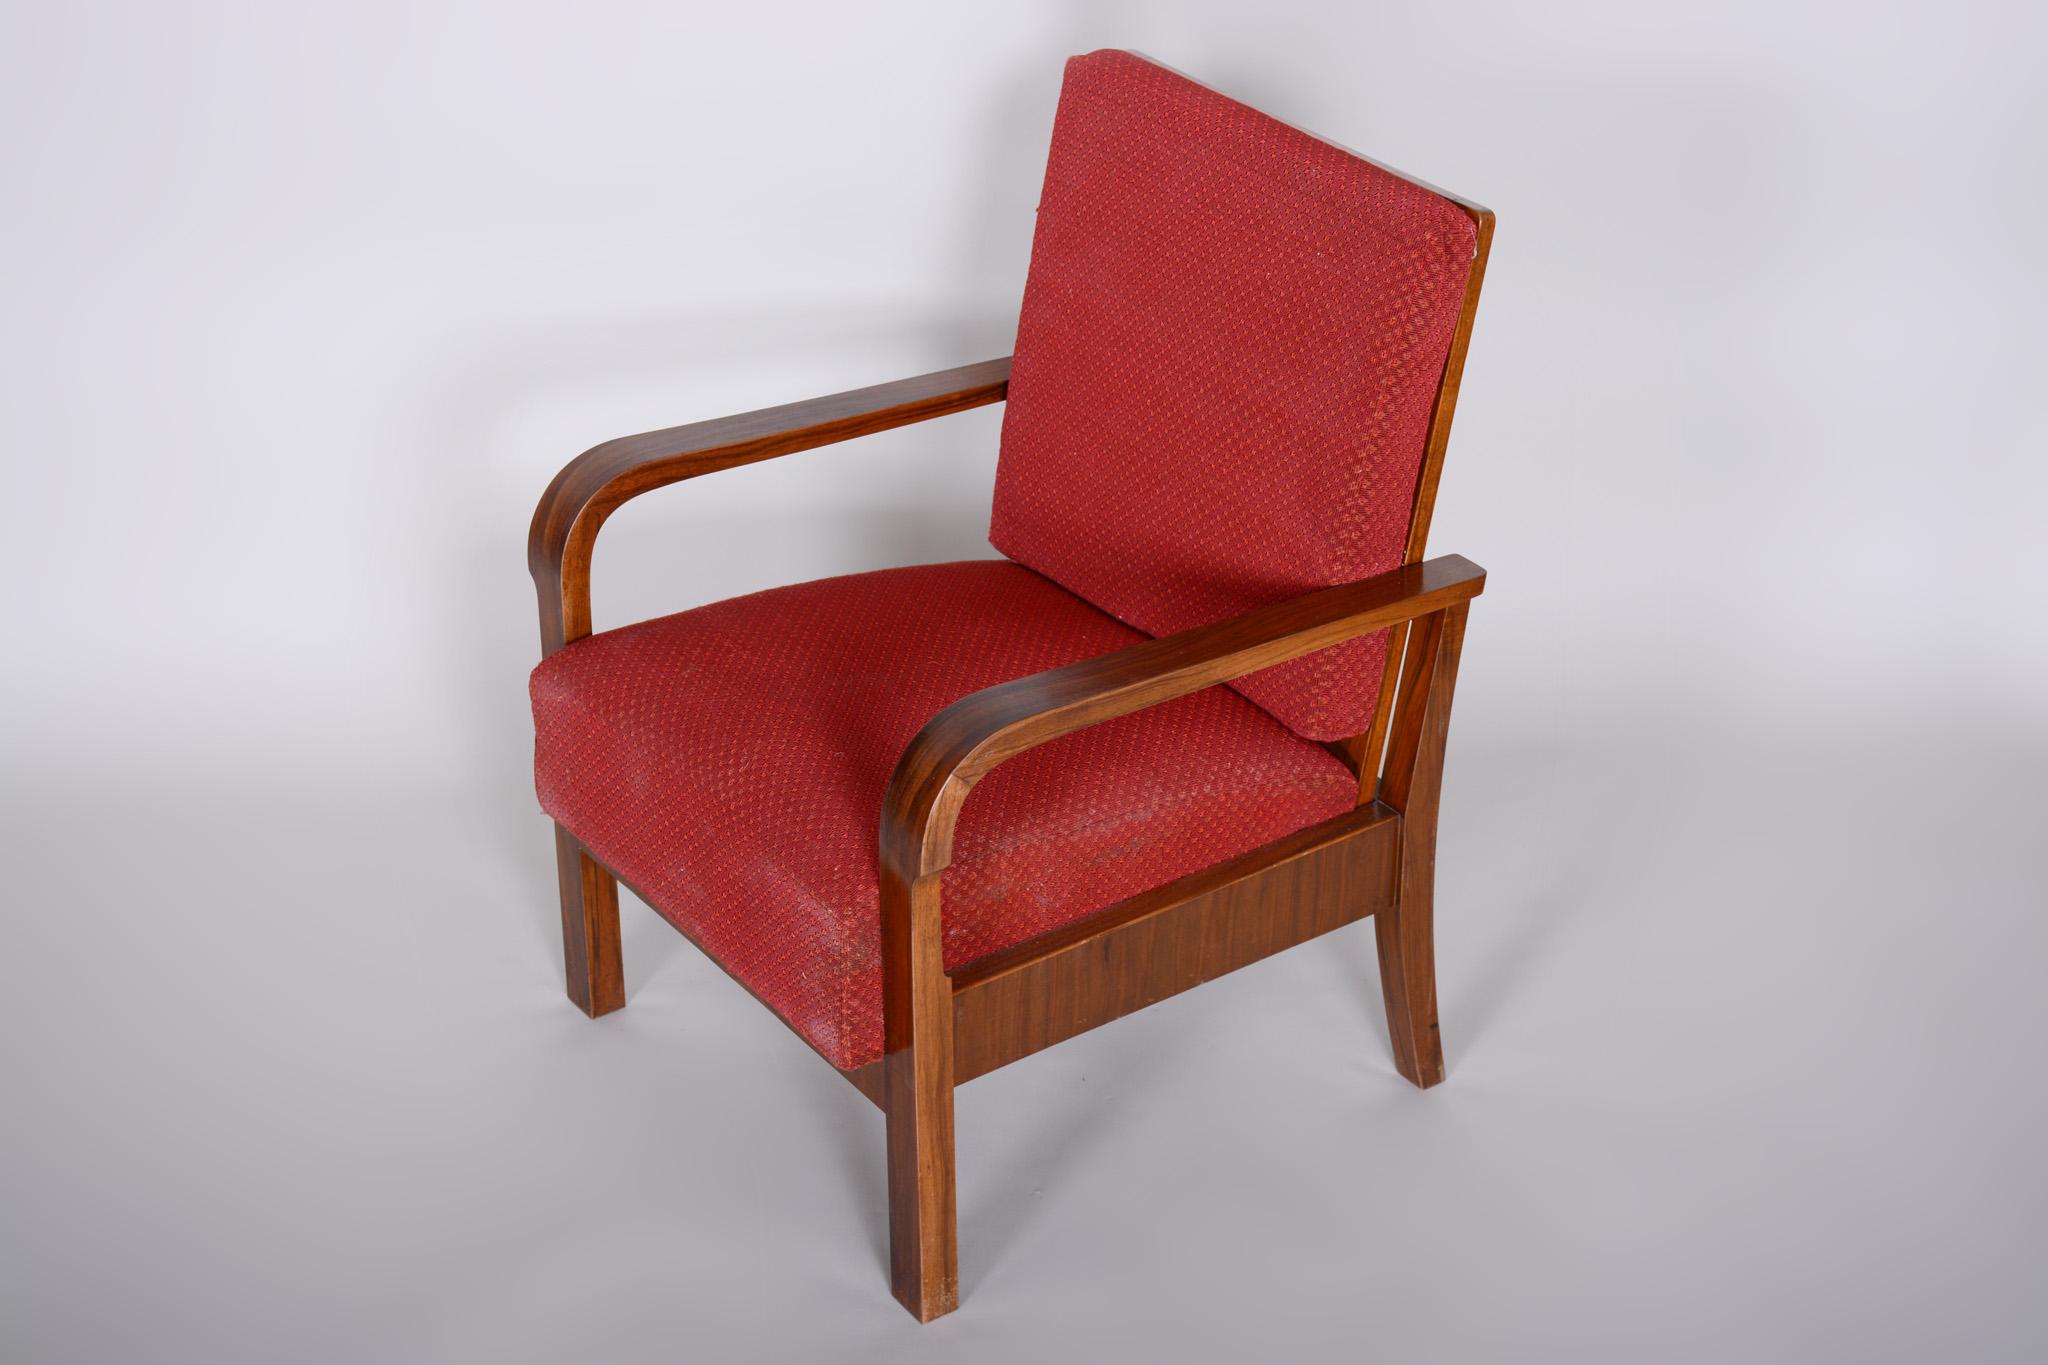 Pair of Walnut Positioning Armchairs, Original upholstery, Restored wood, 1930s For Sale 2